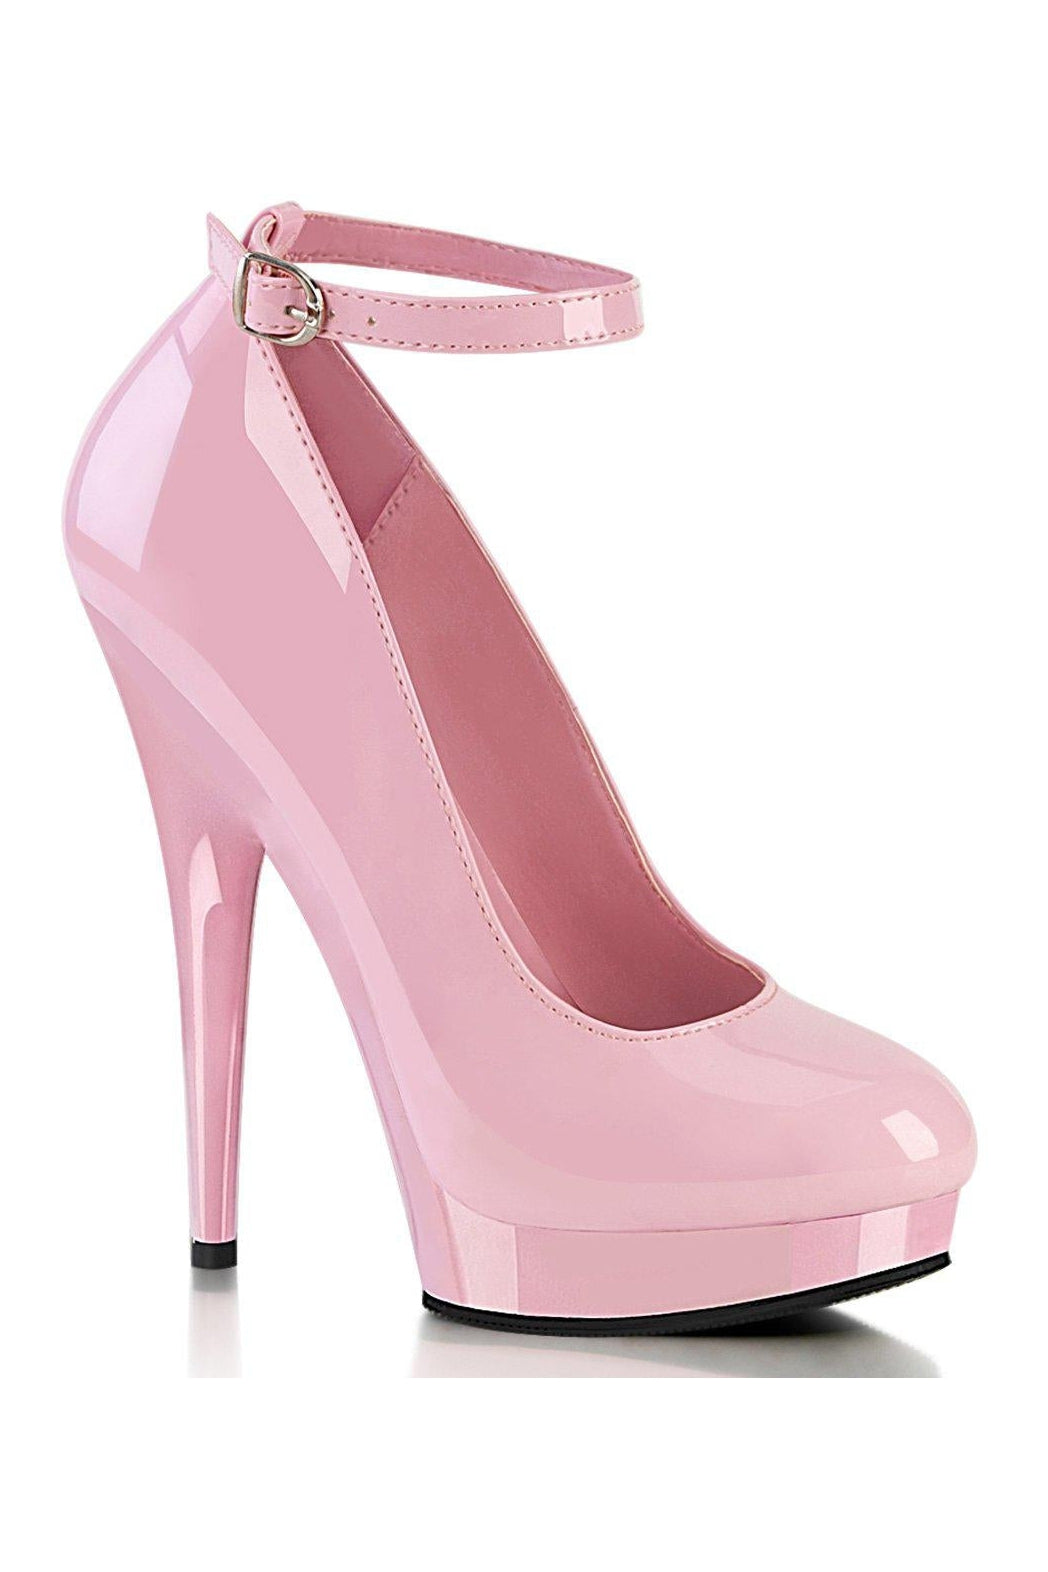 SULTRY-686 Pump | Pink Patent-Pumps-Fabulicious-Pink-6-Patent-SEXYSHOES.COM